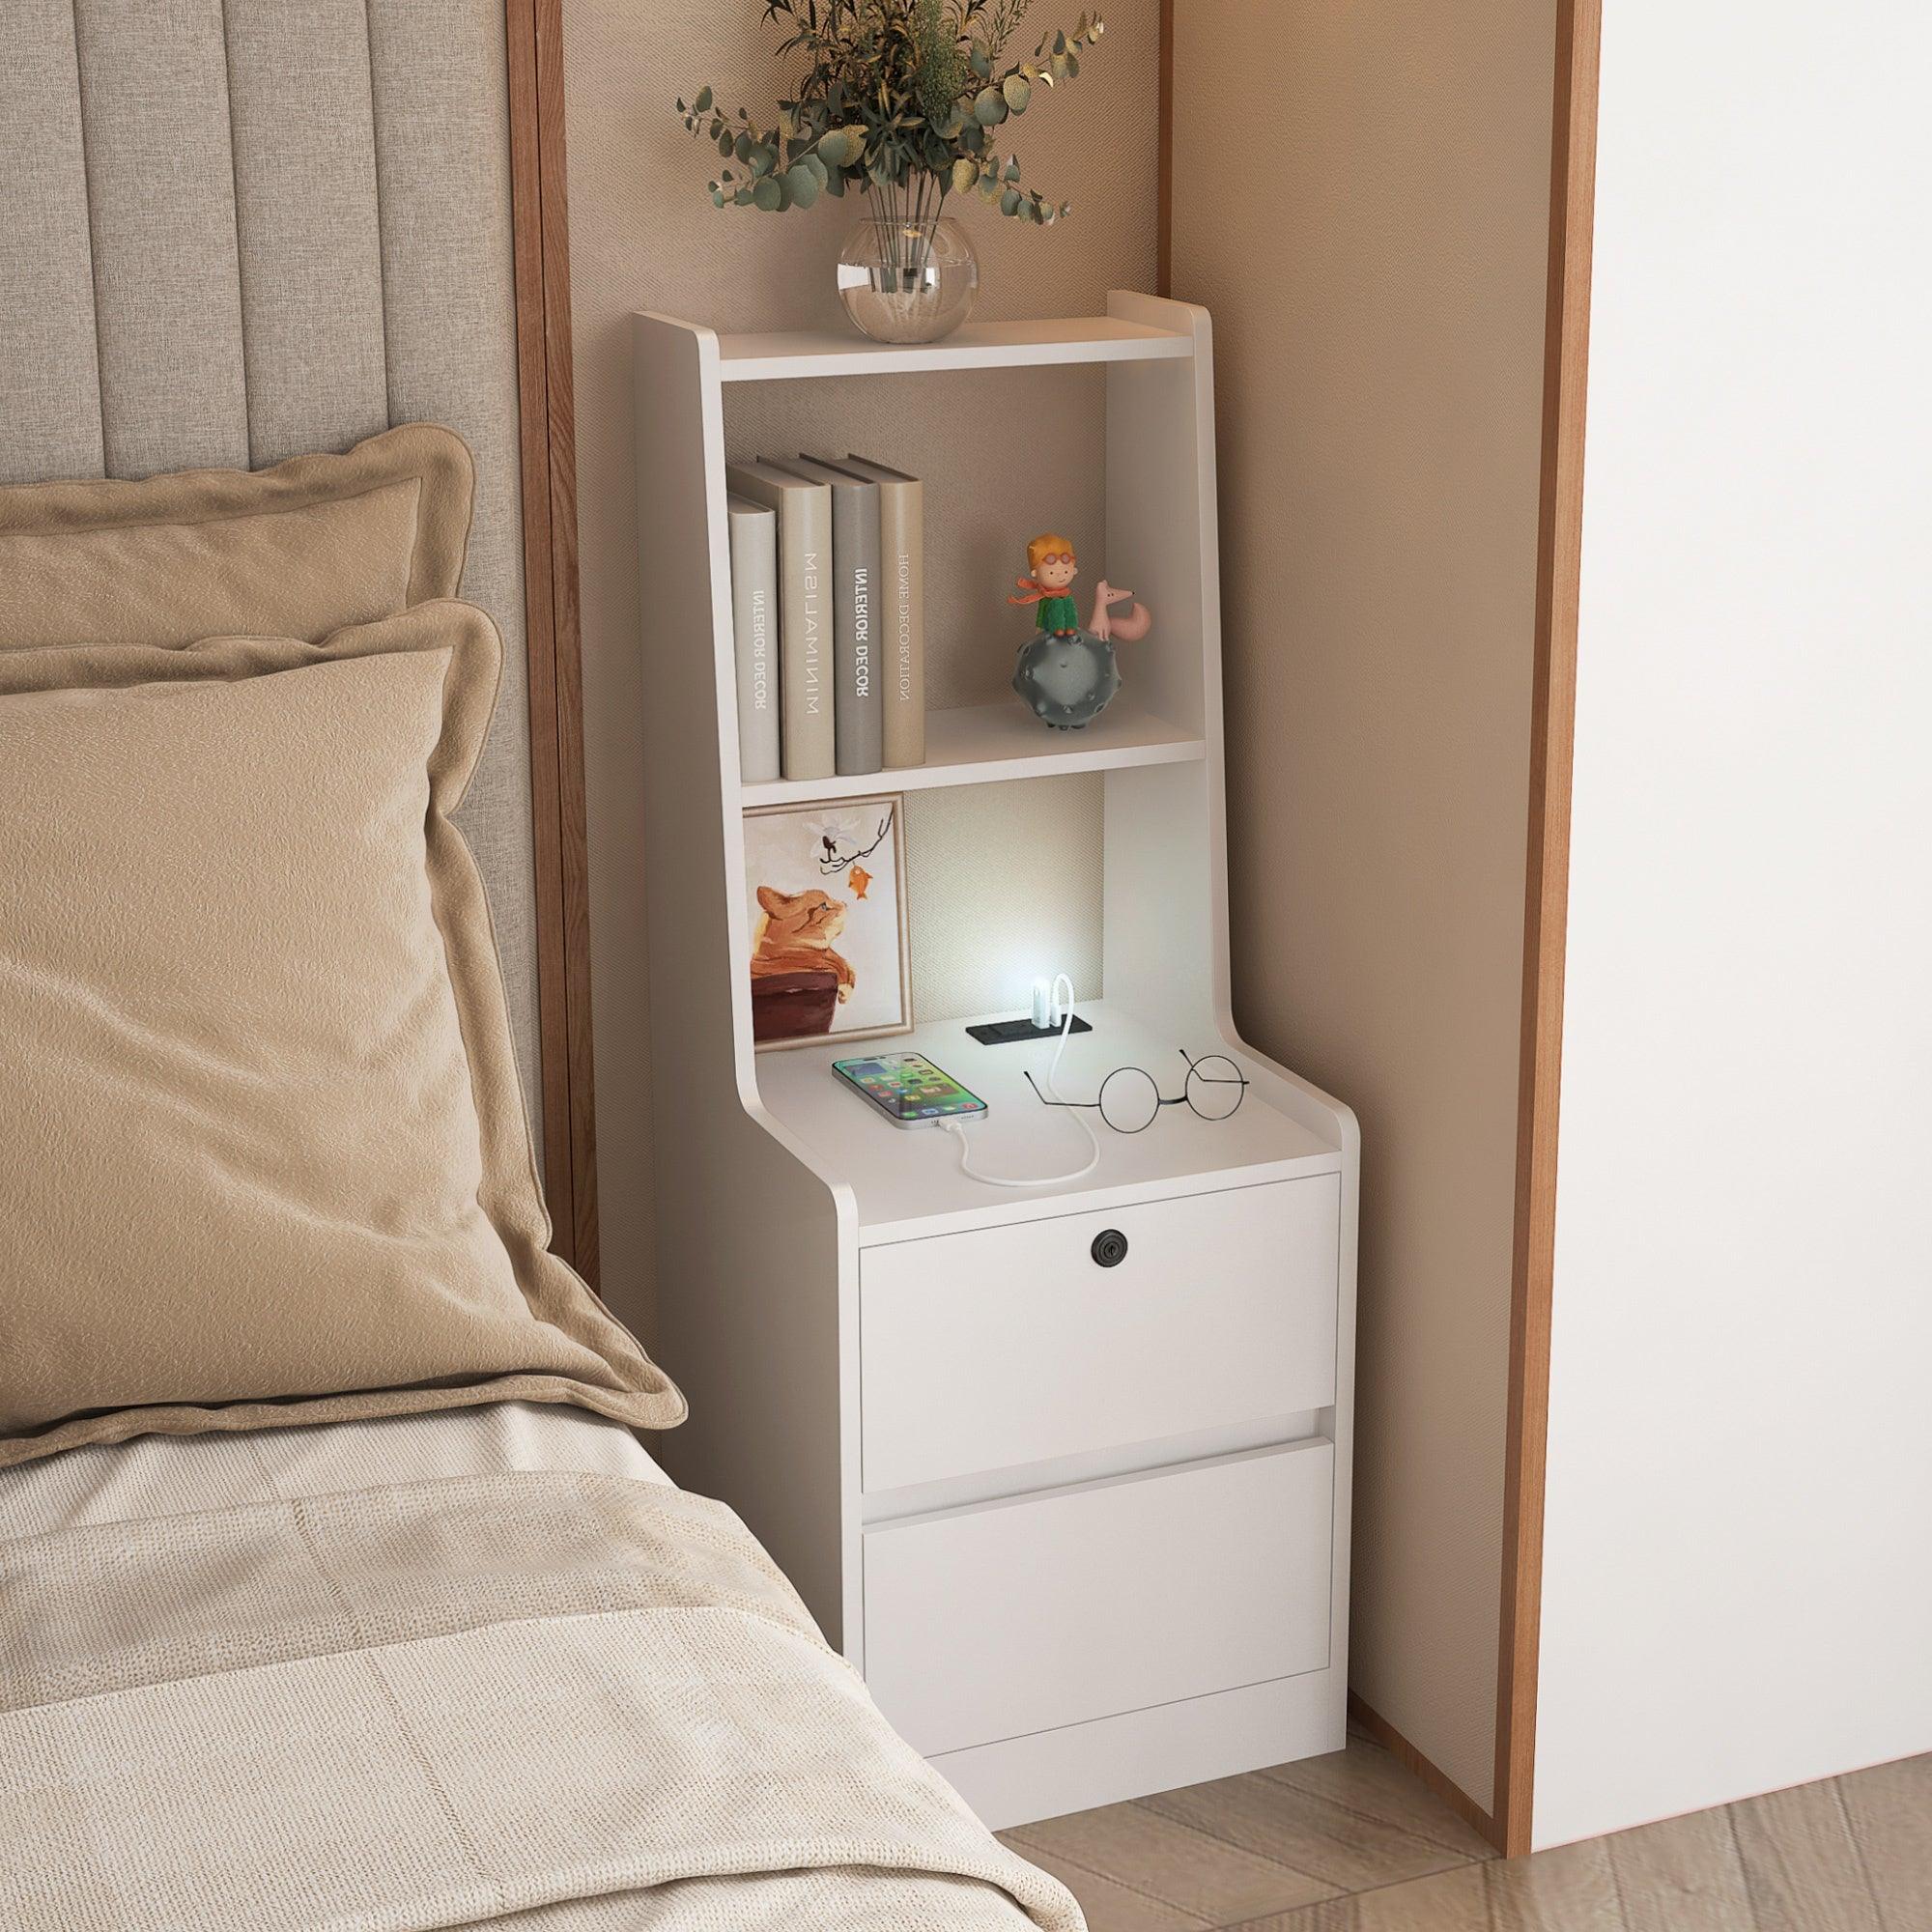 2 Drawer Nightstand With 2-Tier Open Shelving, Voice-Controlled Night Light, AC Power & USB Charging Outlets LamCham